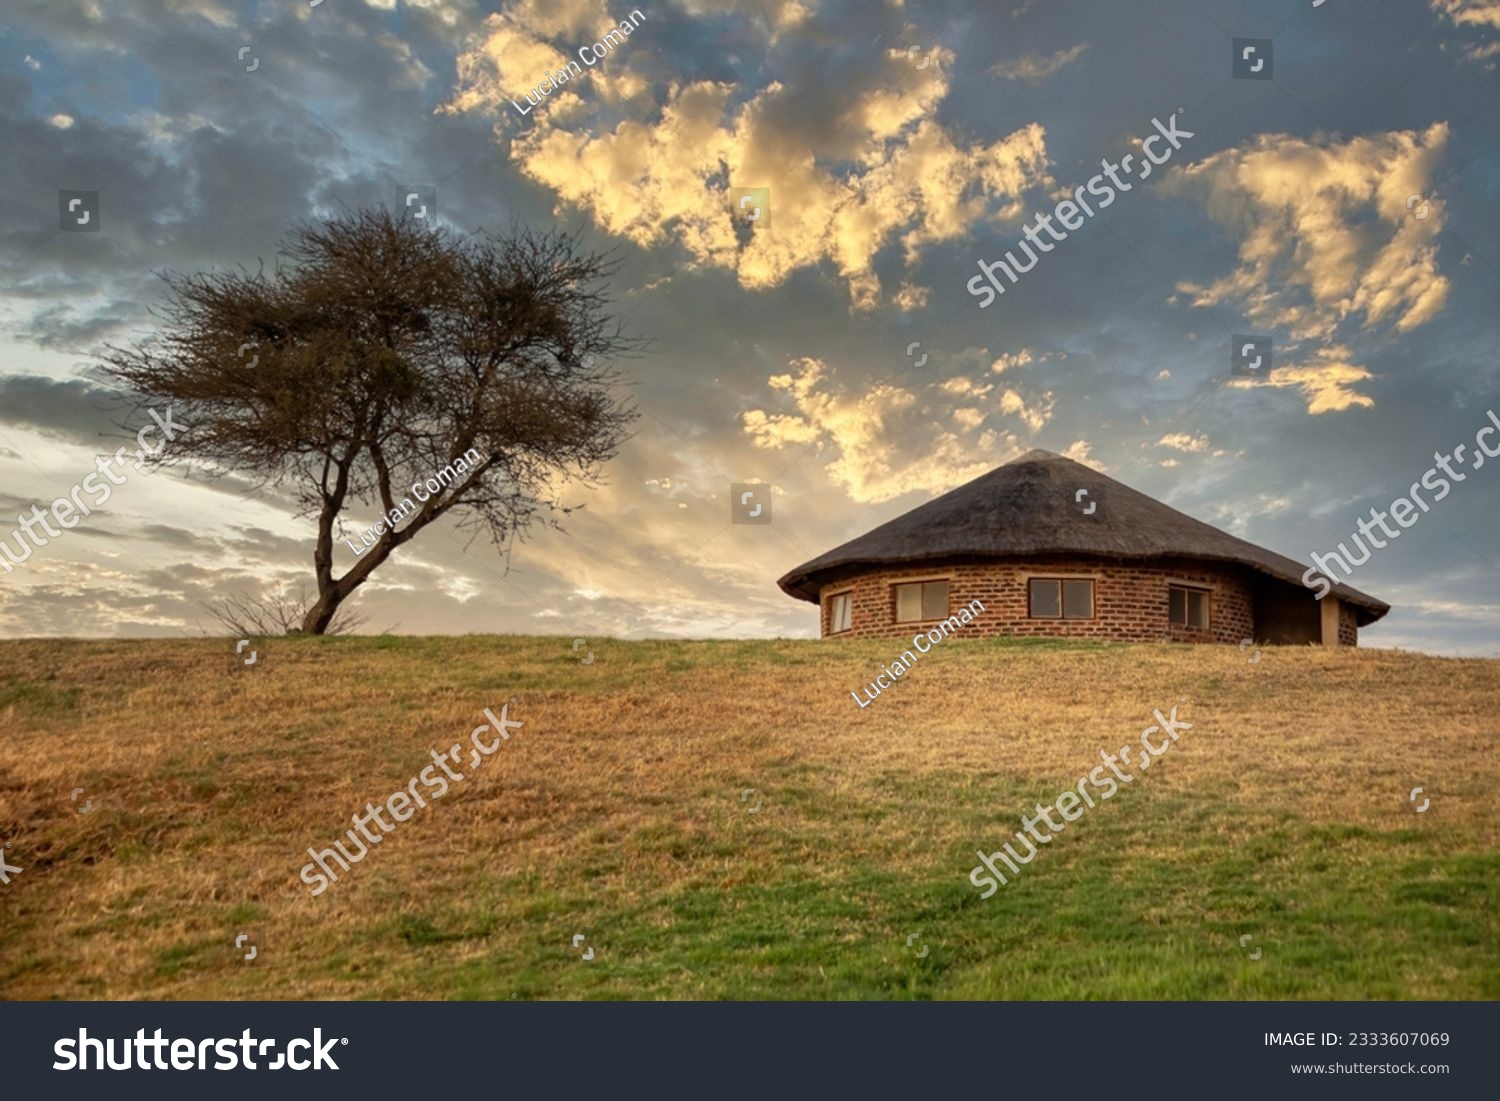 rondavel african house with thatched roof and a solitaire tree #2333607069